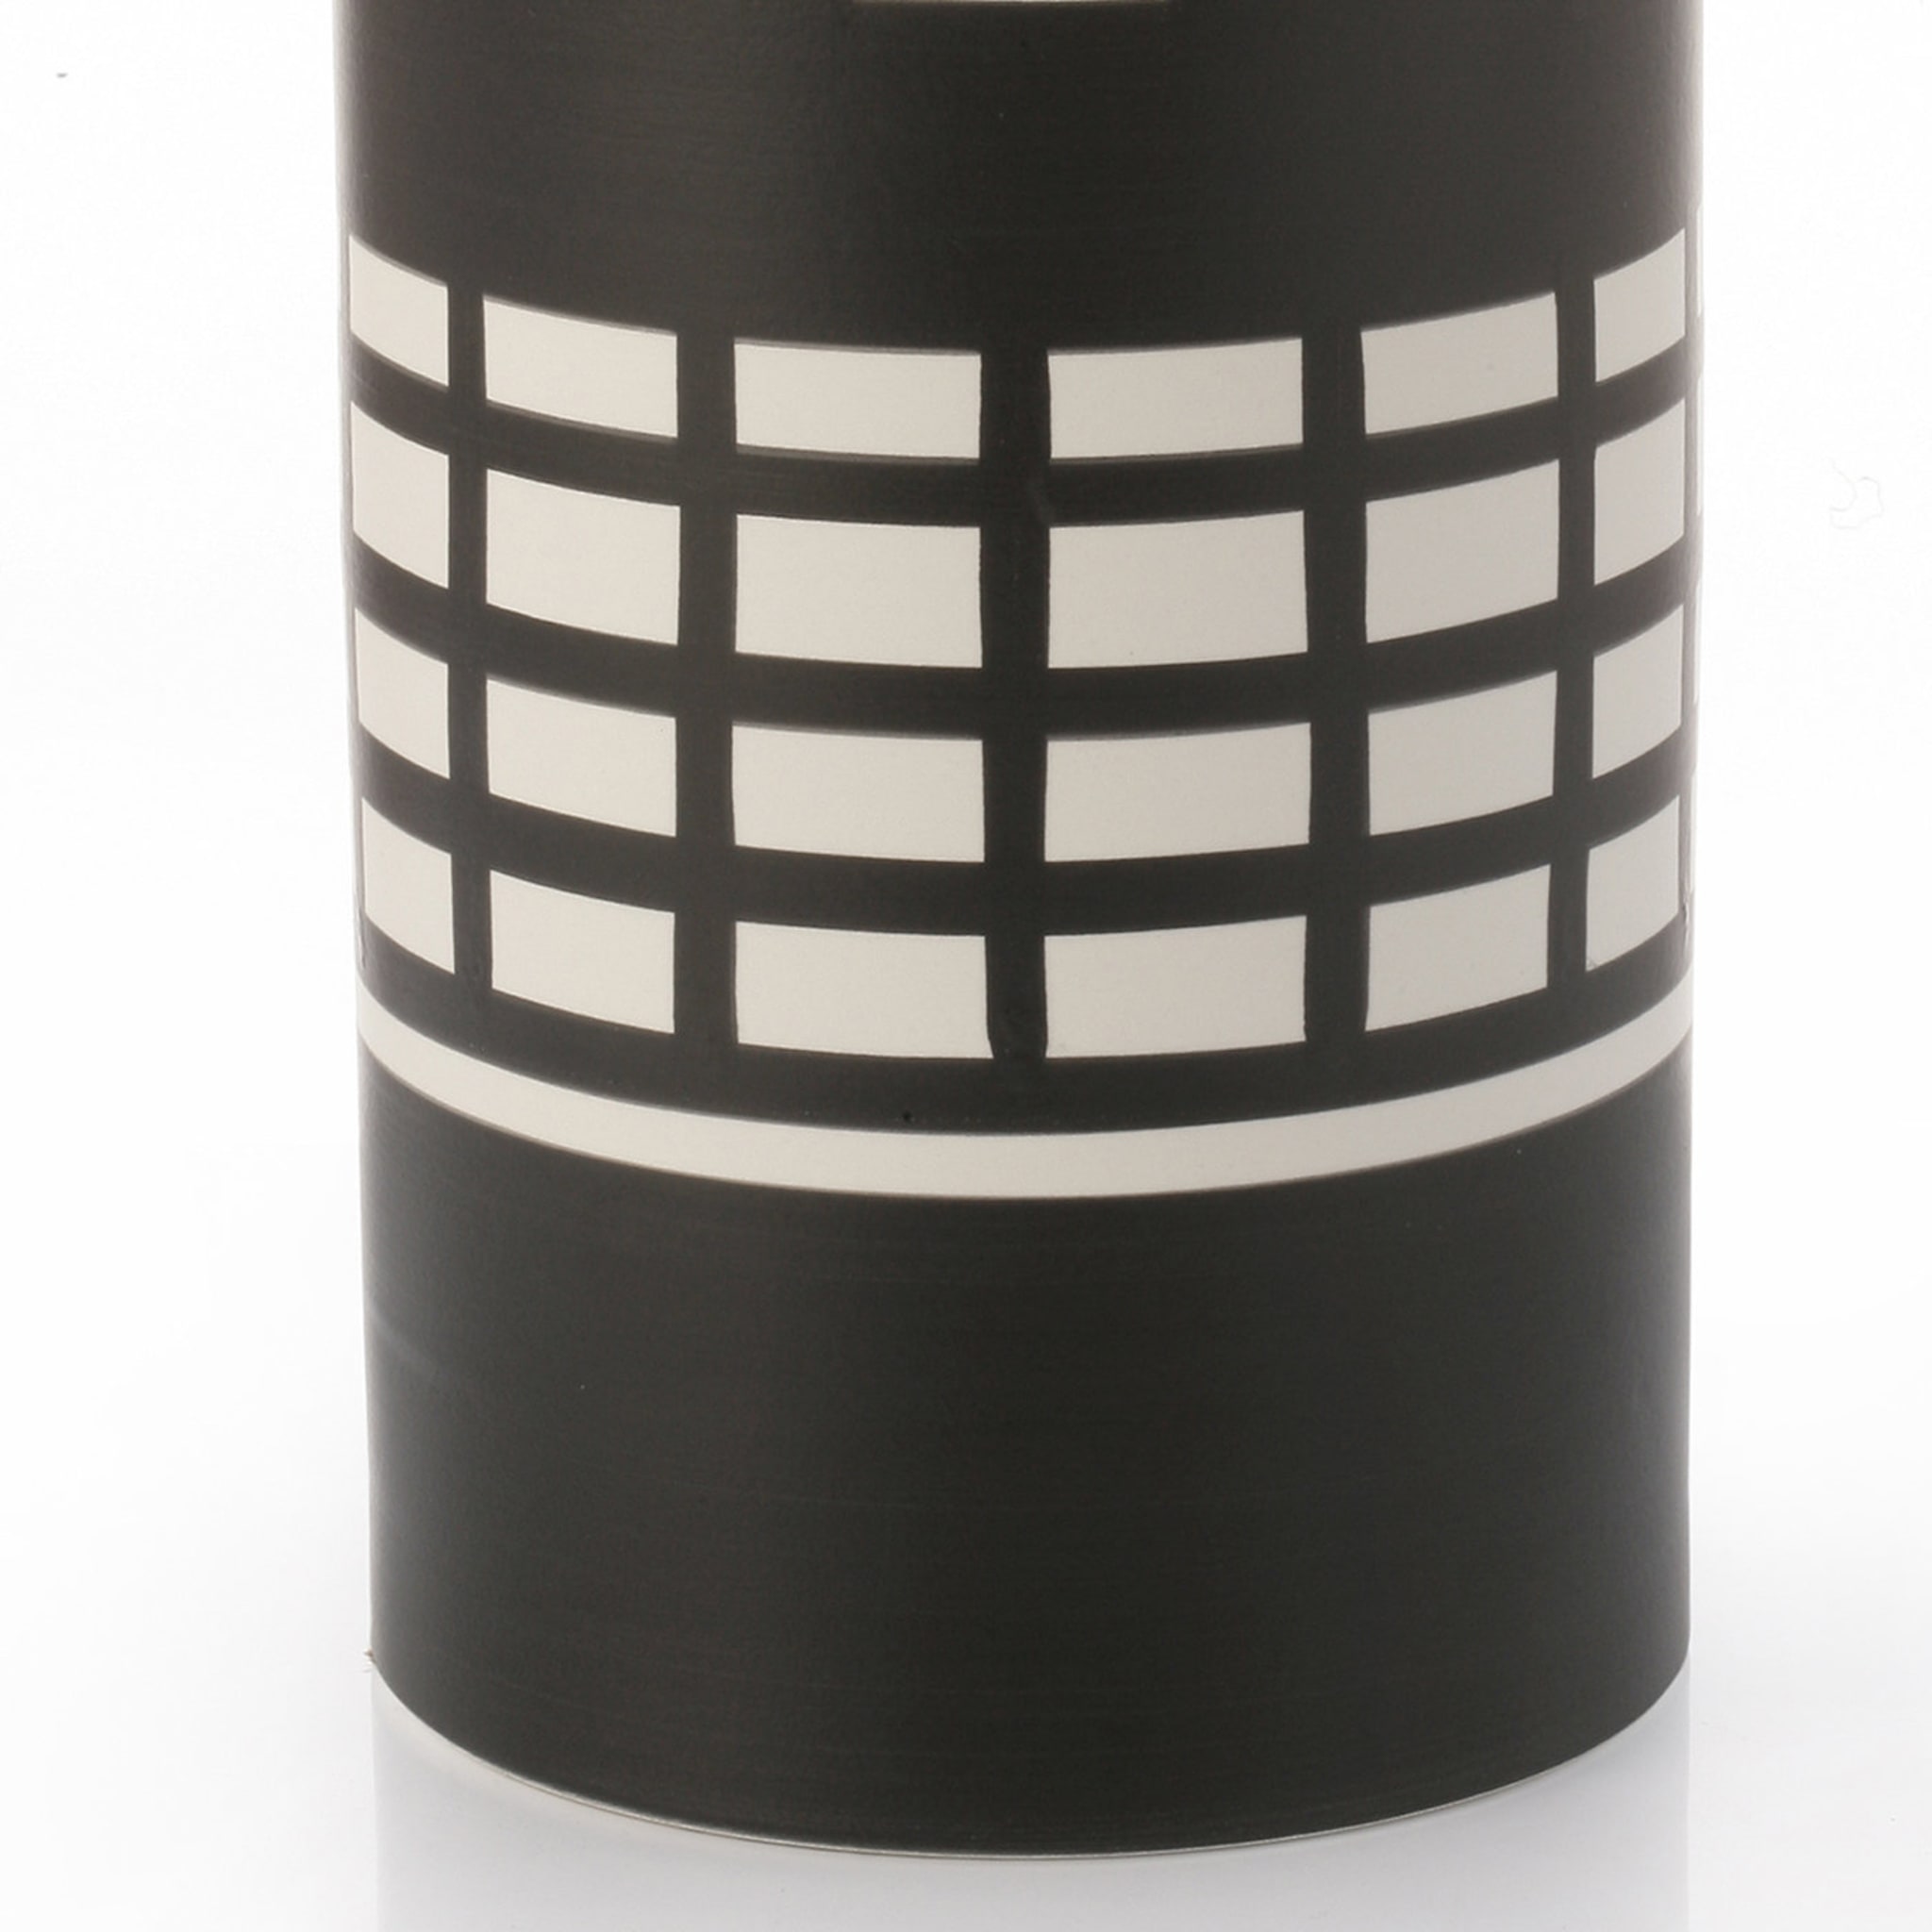 Black and White Reel Vase by Ettore Sottsass - Alternative view 2